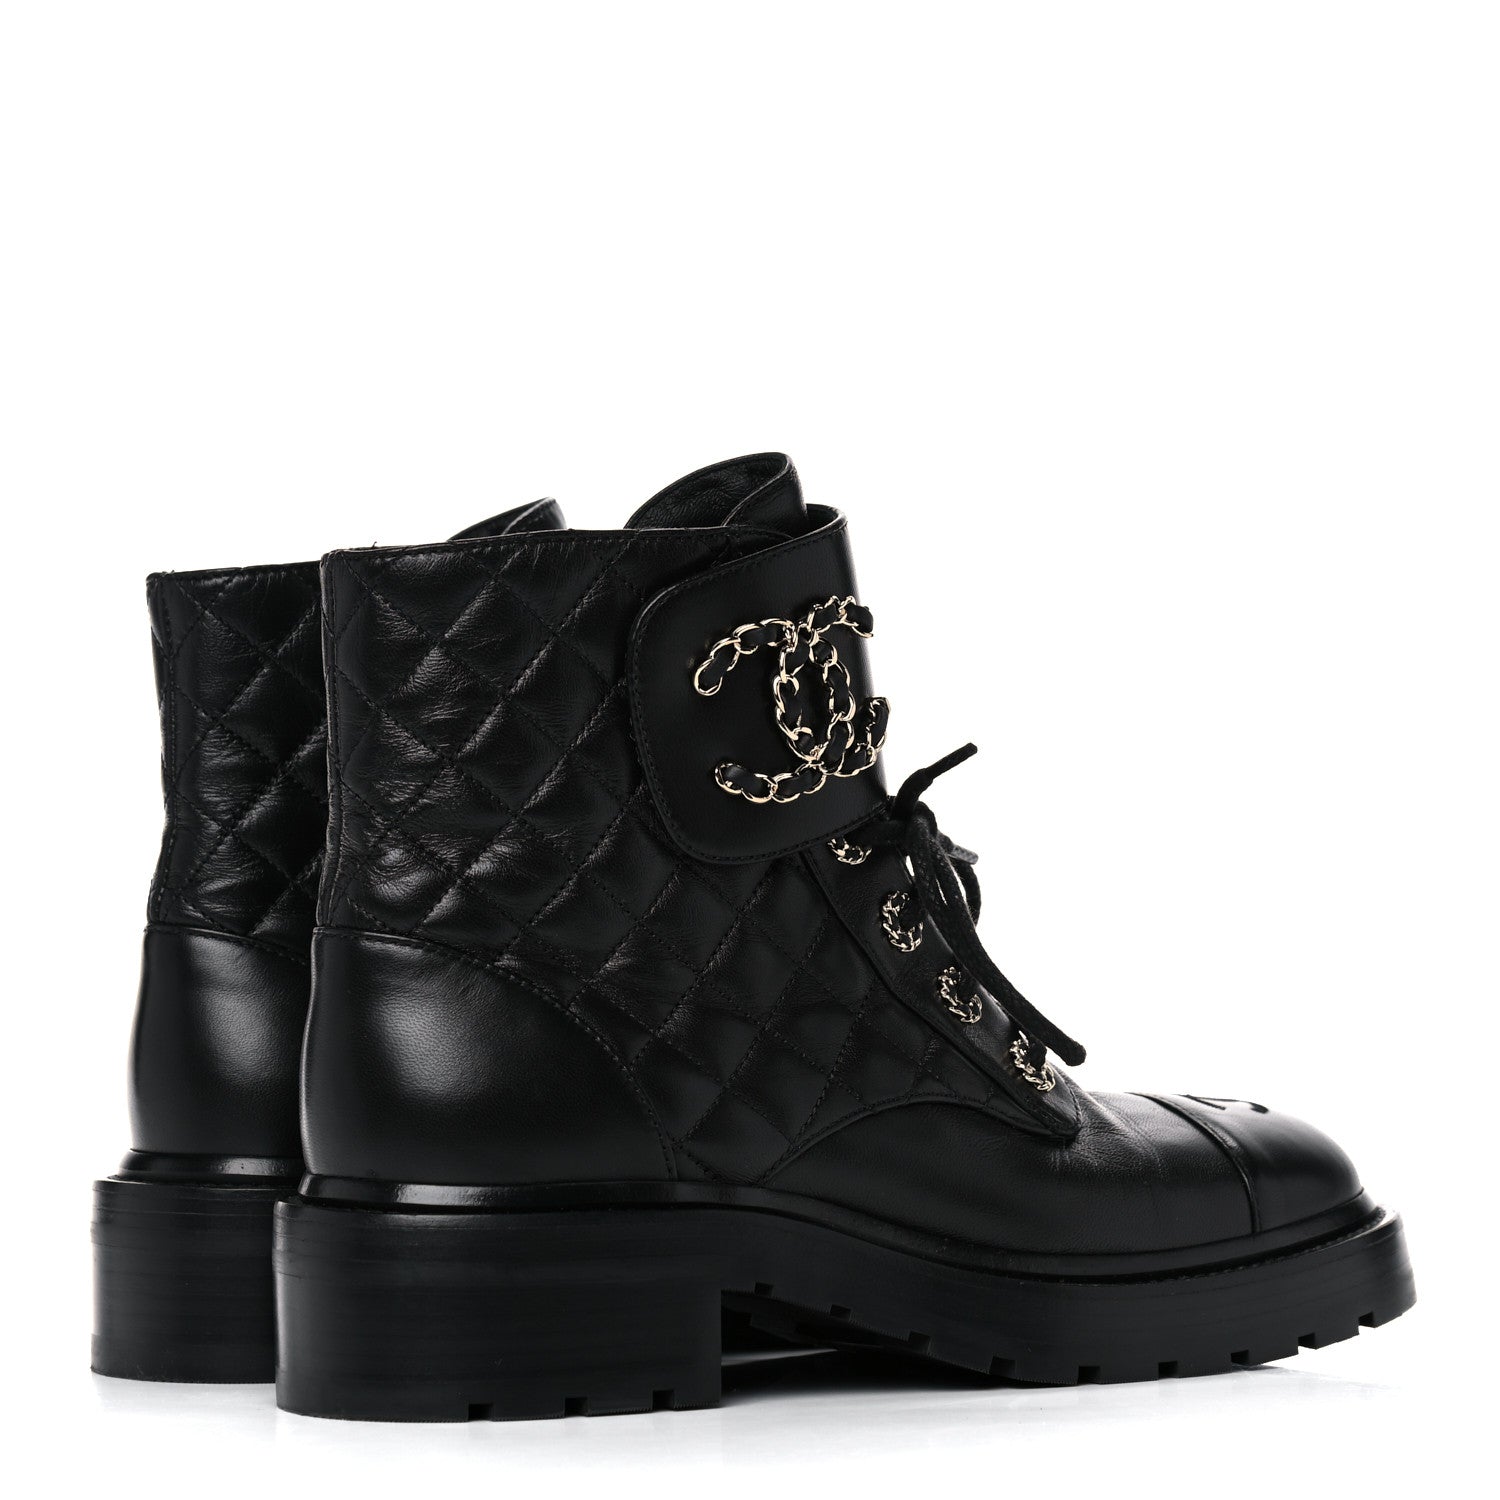 Chanel Black White Logo Lace Up Fall Winter Combat ankle Boots EU